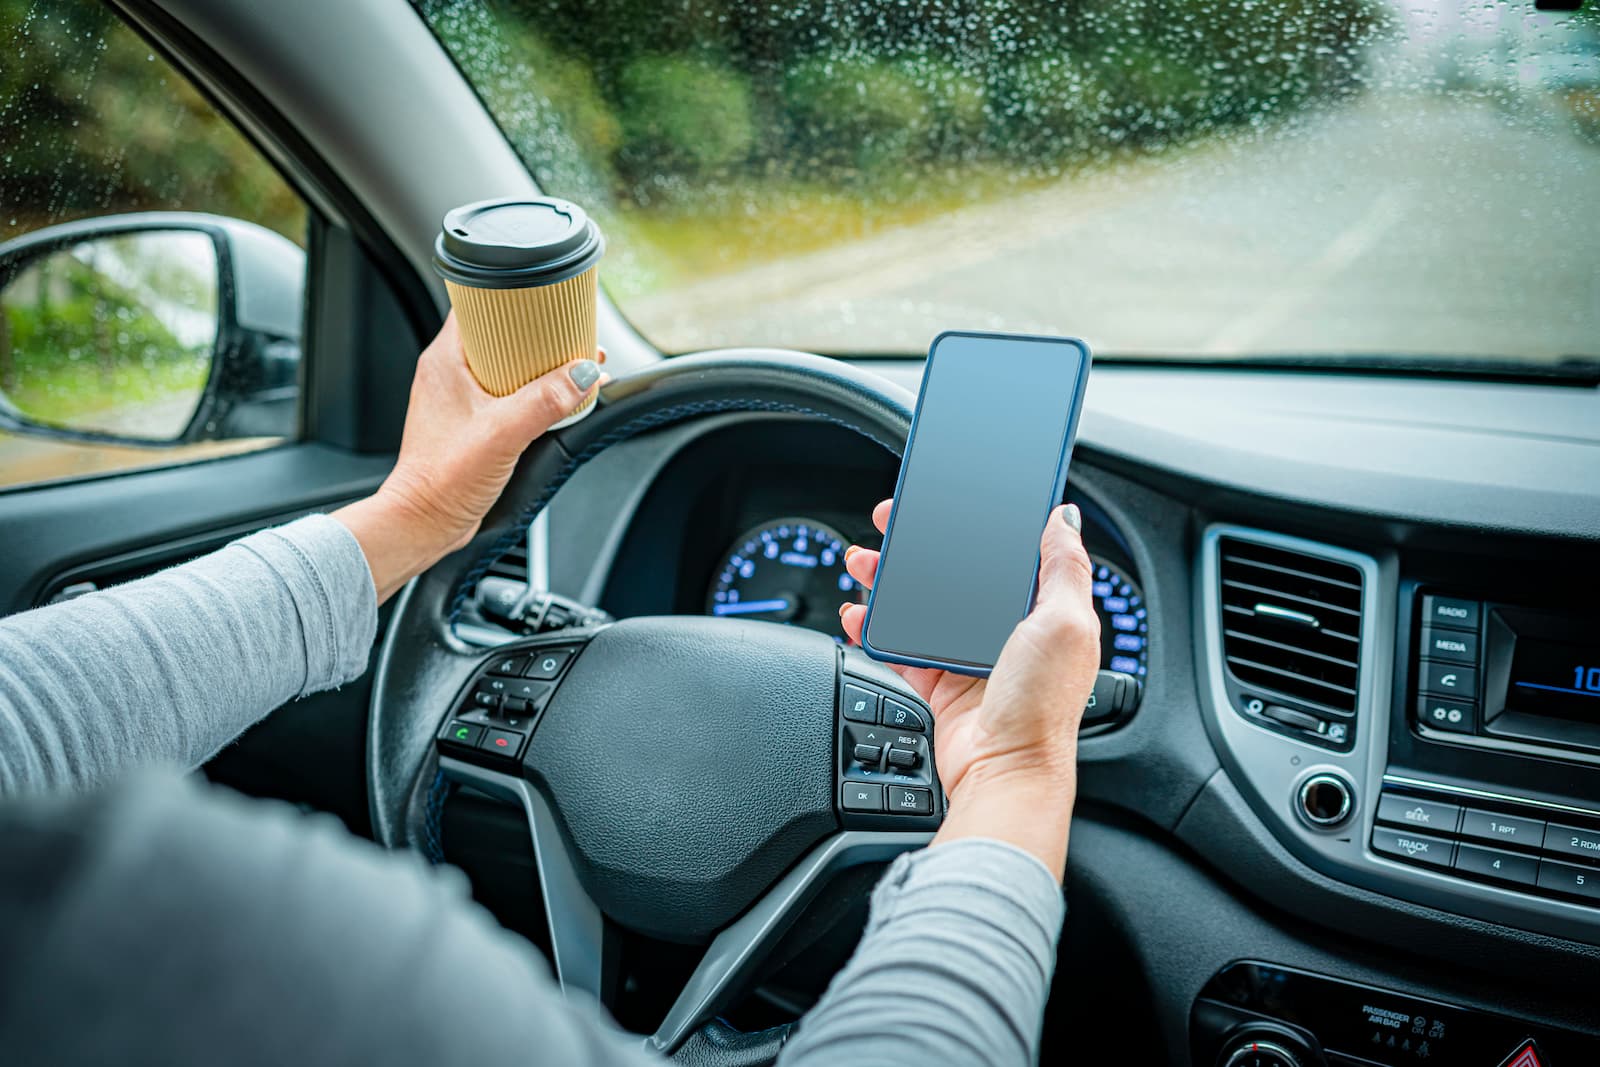 Distracted Driver on Cell Phone, drinking Coffee